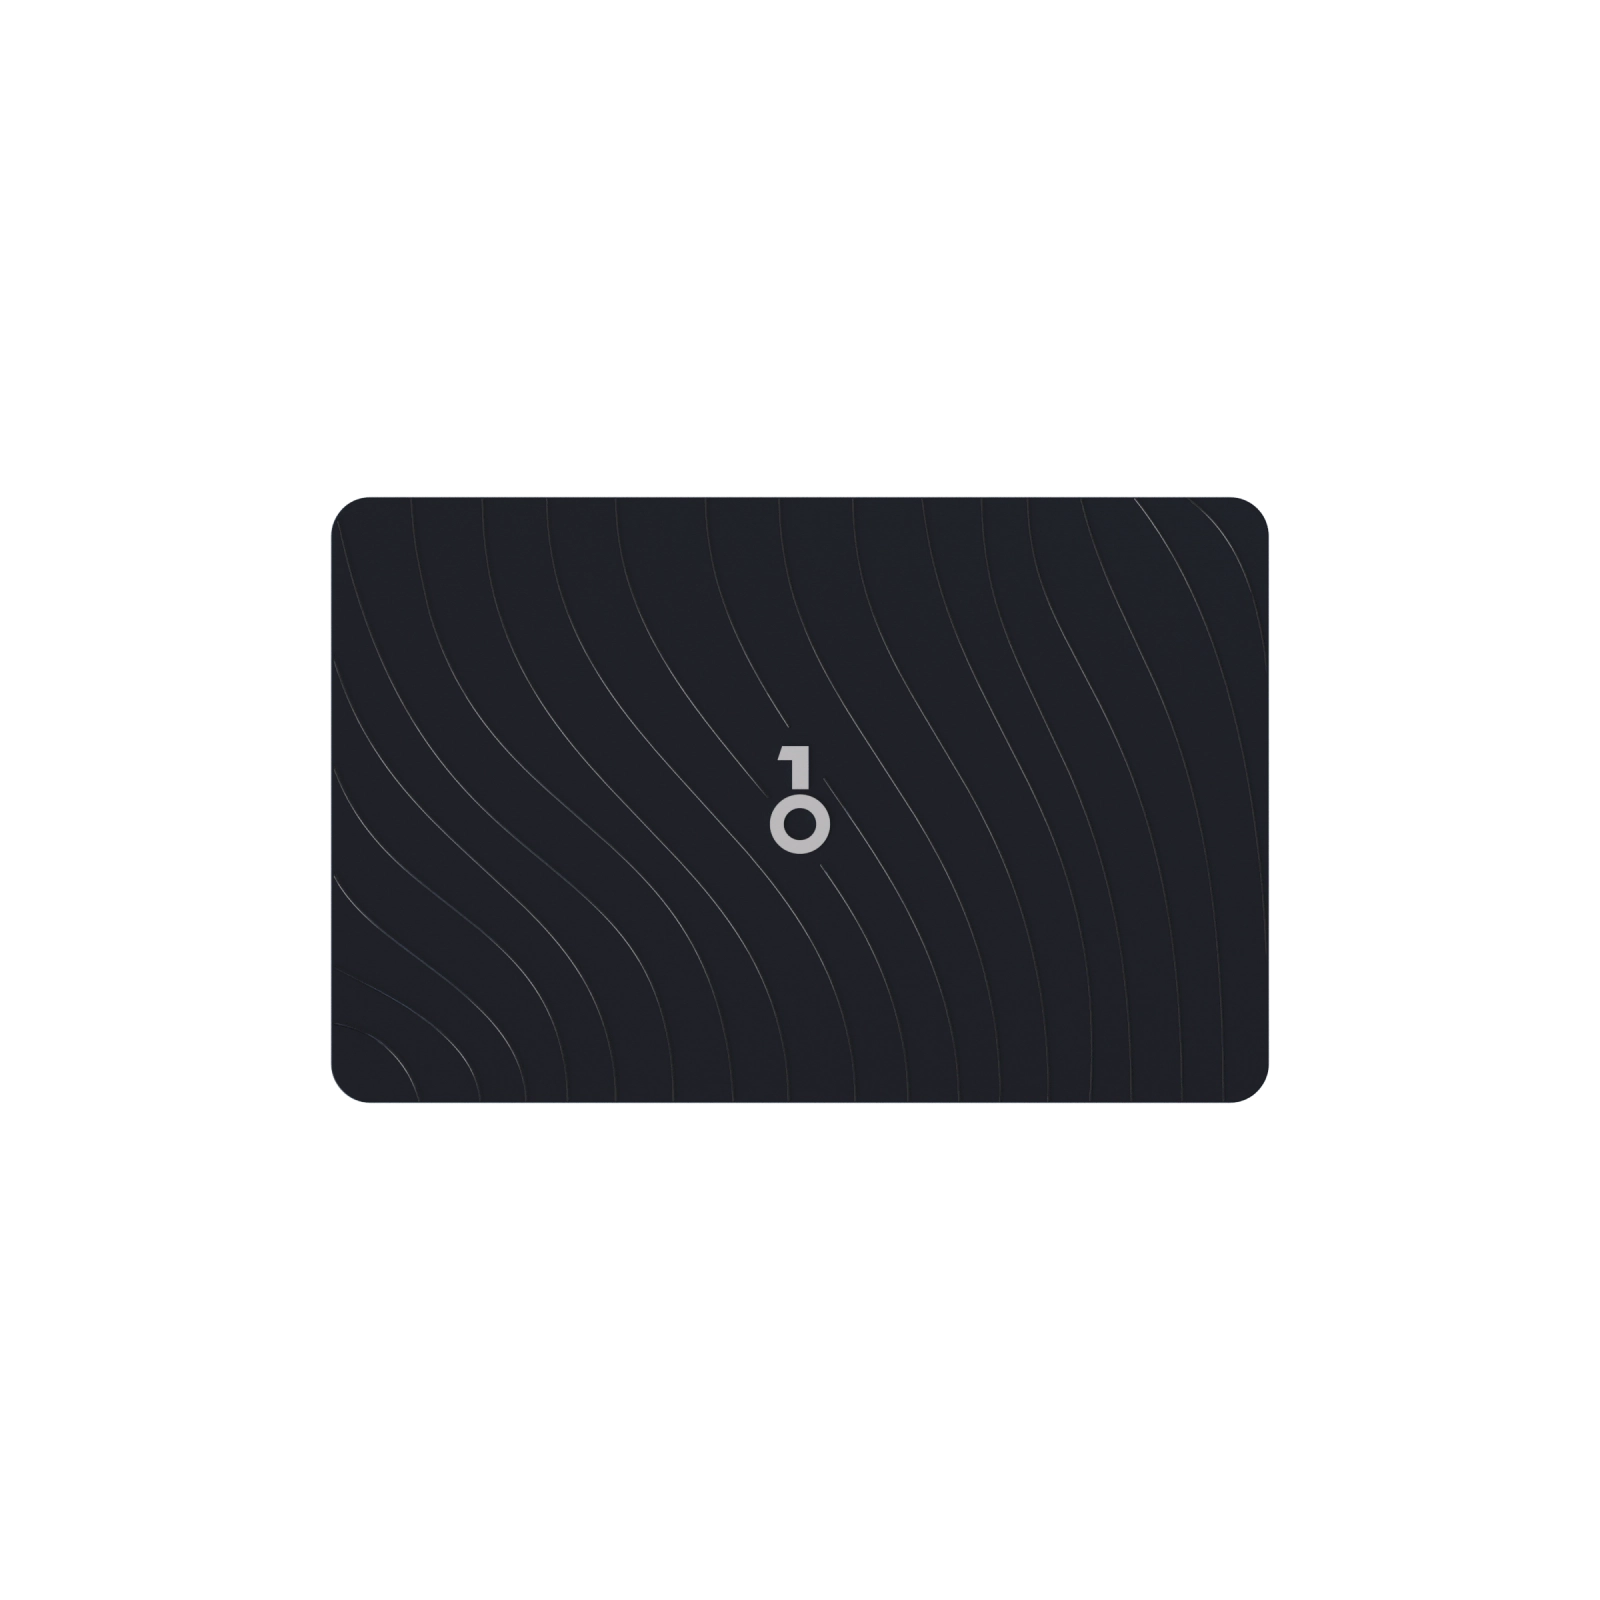 OneKey Lite Recovery Phrase Backup Card